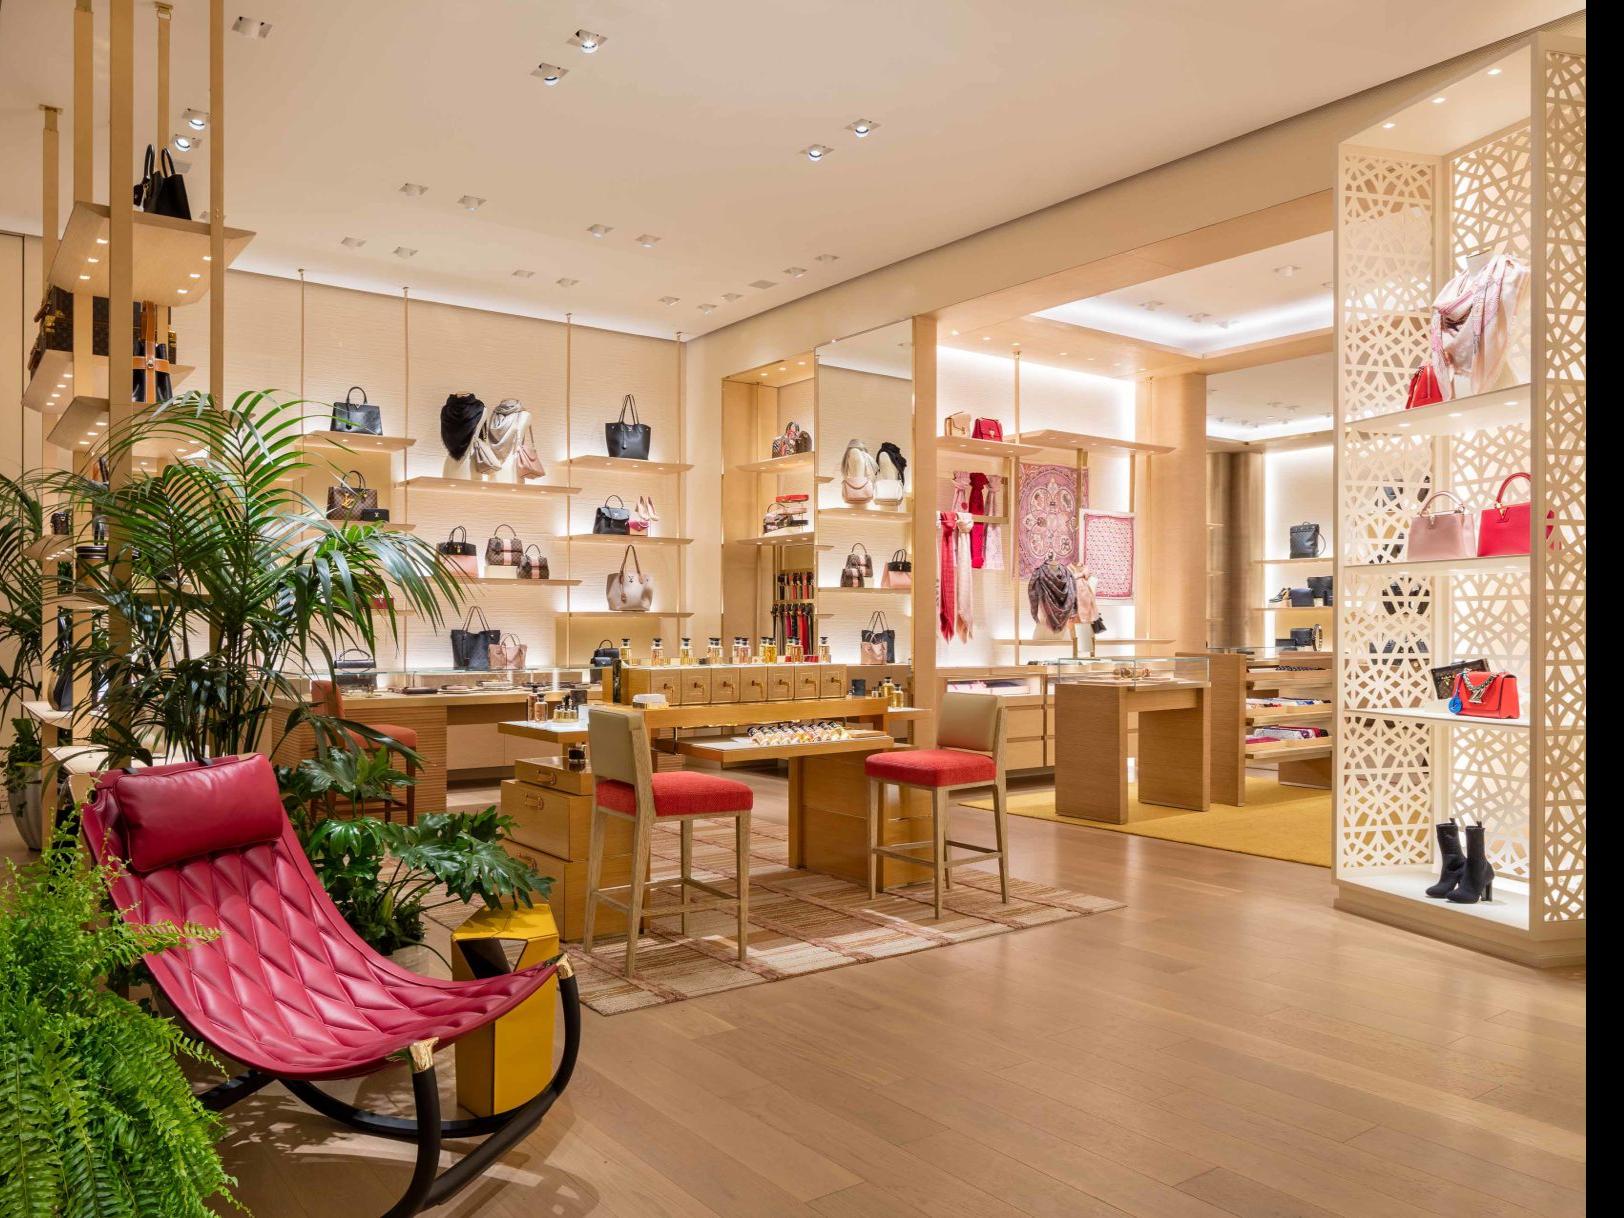 Louis Vuitton is now open in New Orleans, Business News